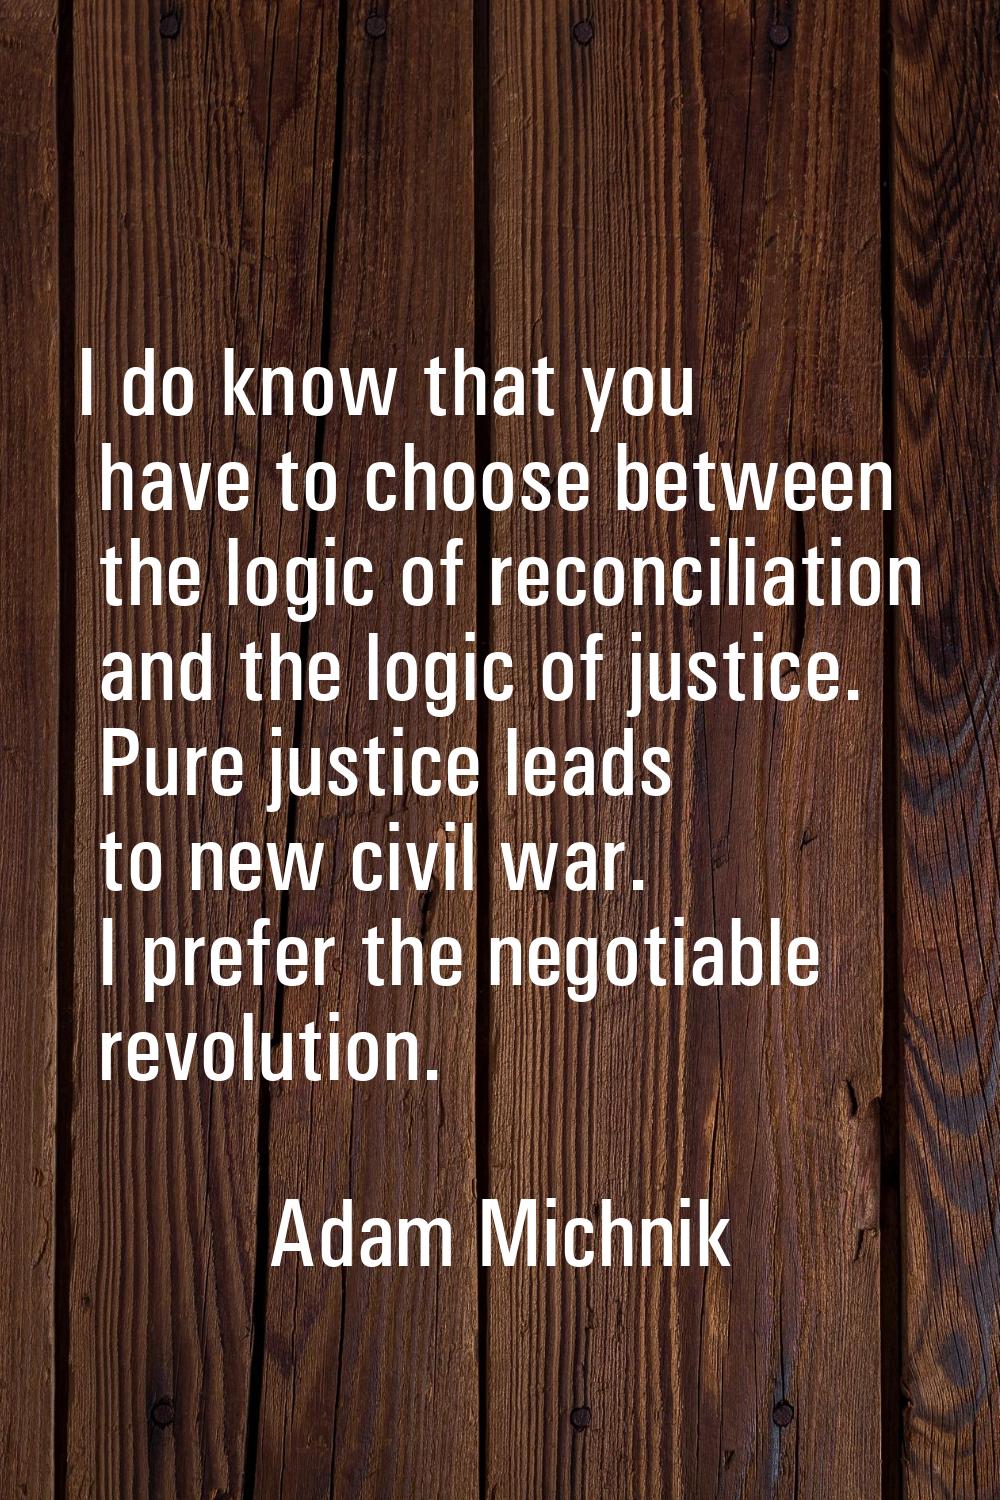 I do know that you have to choose between the logic of reconciliation and the logic of justice. Pur